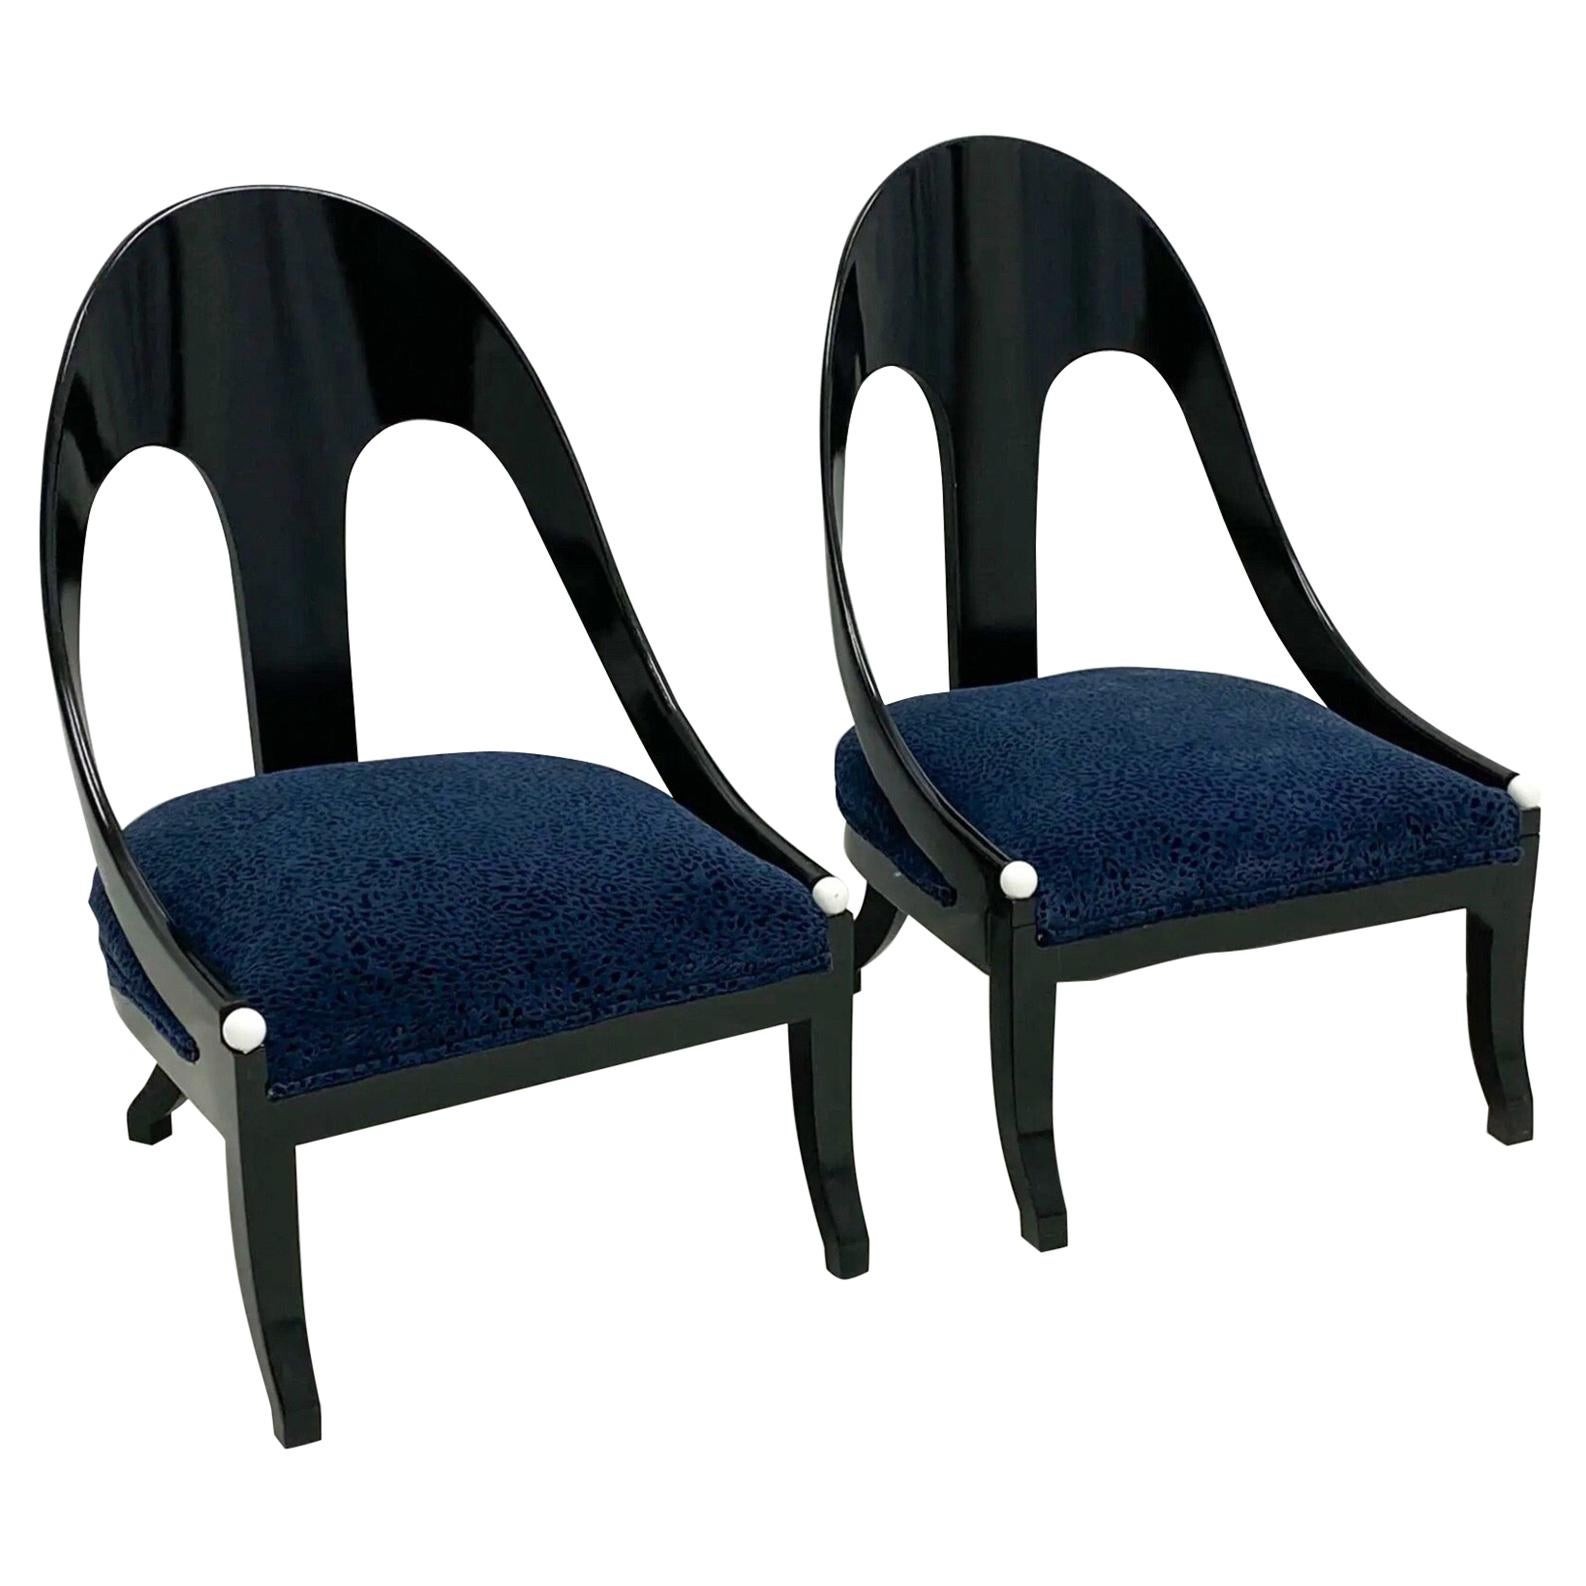 Mid-Century Modern Lacquered Horseshoe Back Chairs Att. to Baker Furniture, Pair For Sale